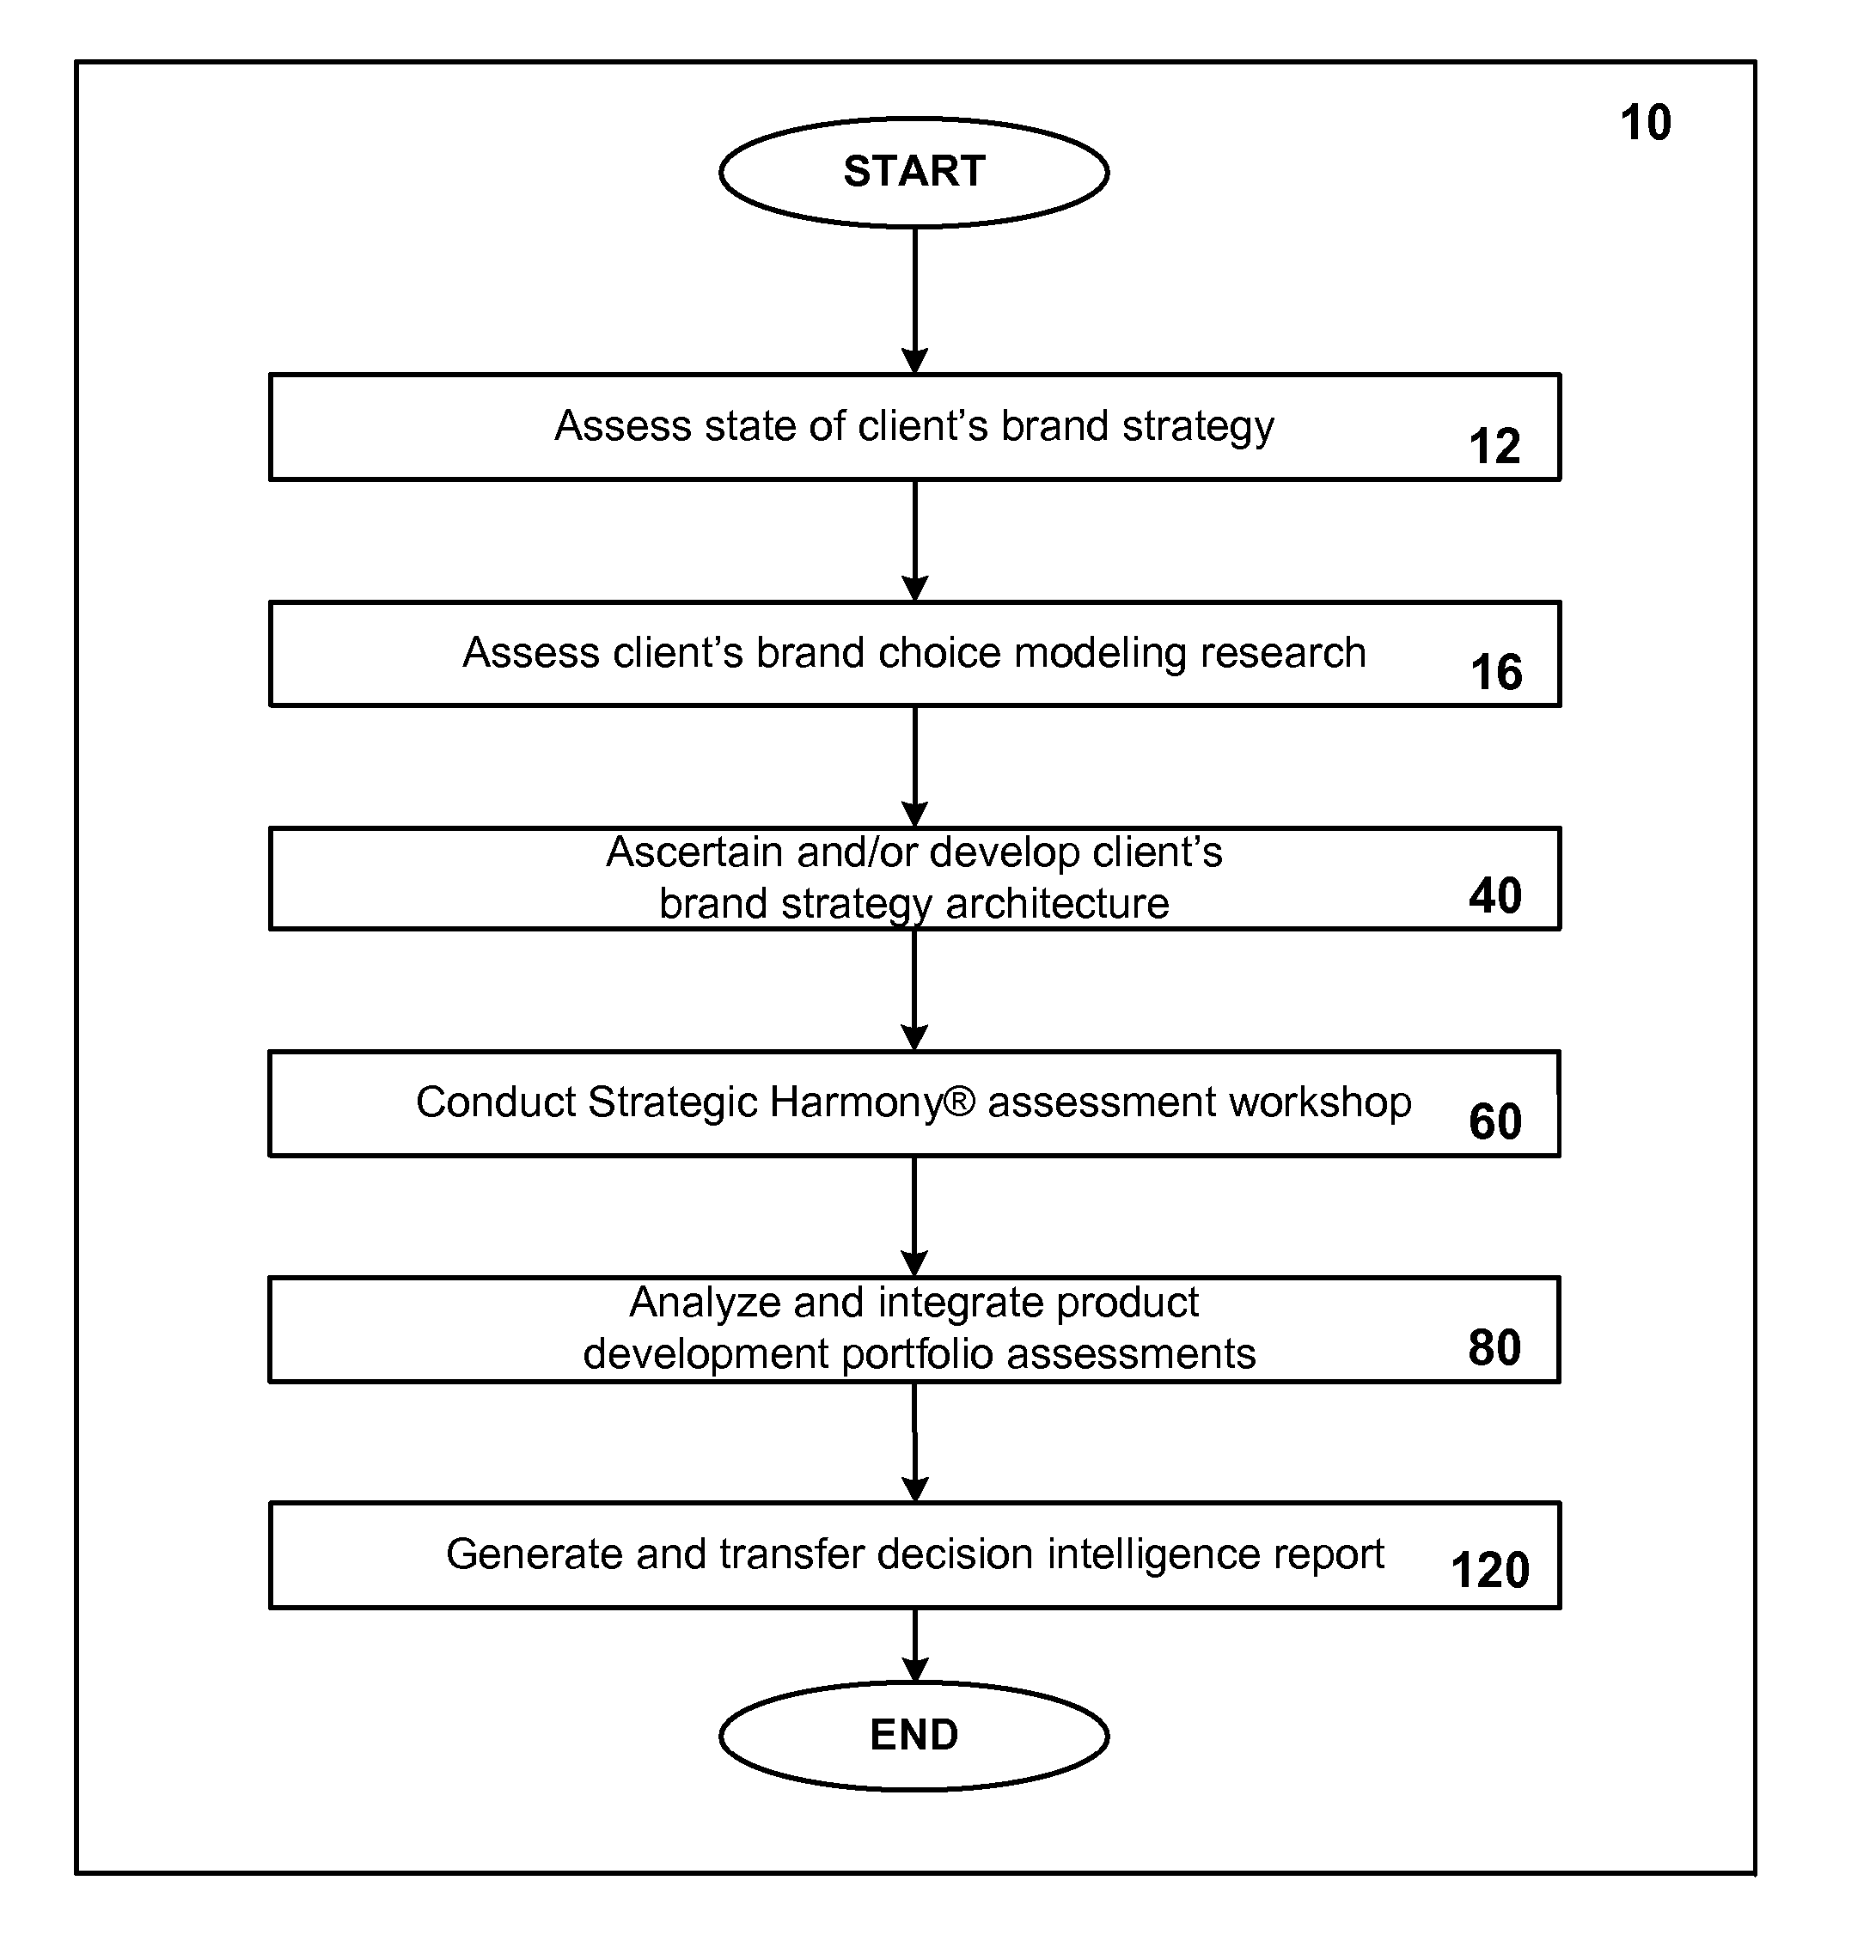 System and method for optimizing product development portfolios and integrating product strategy with brand strategy